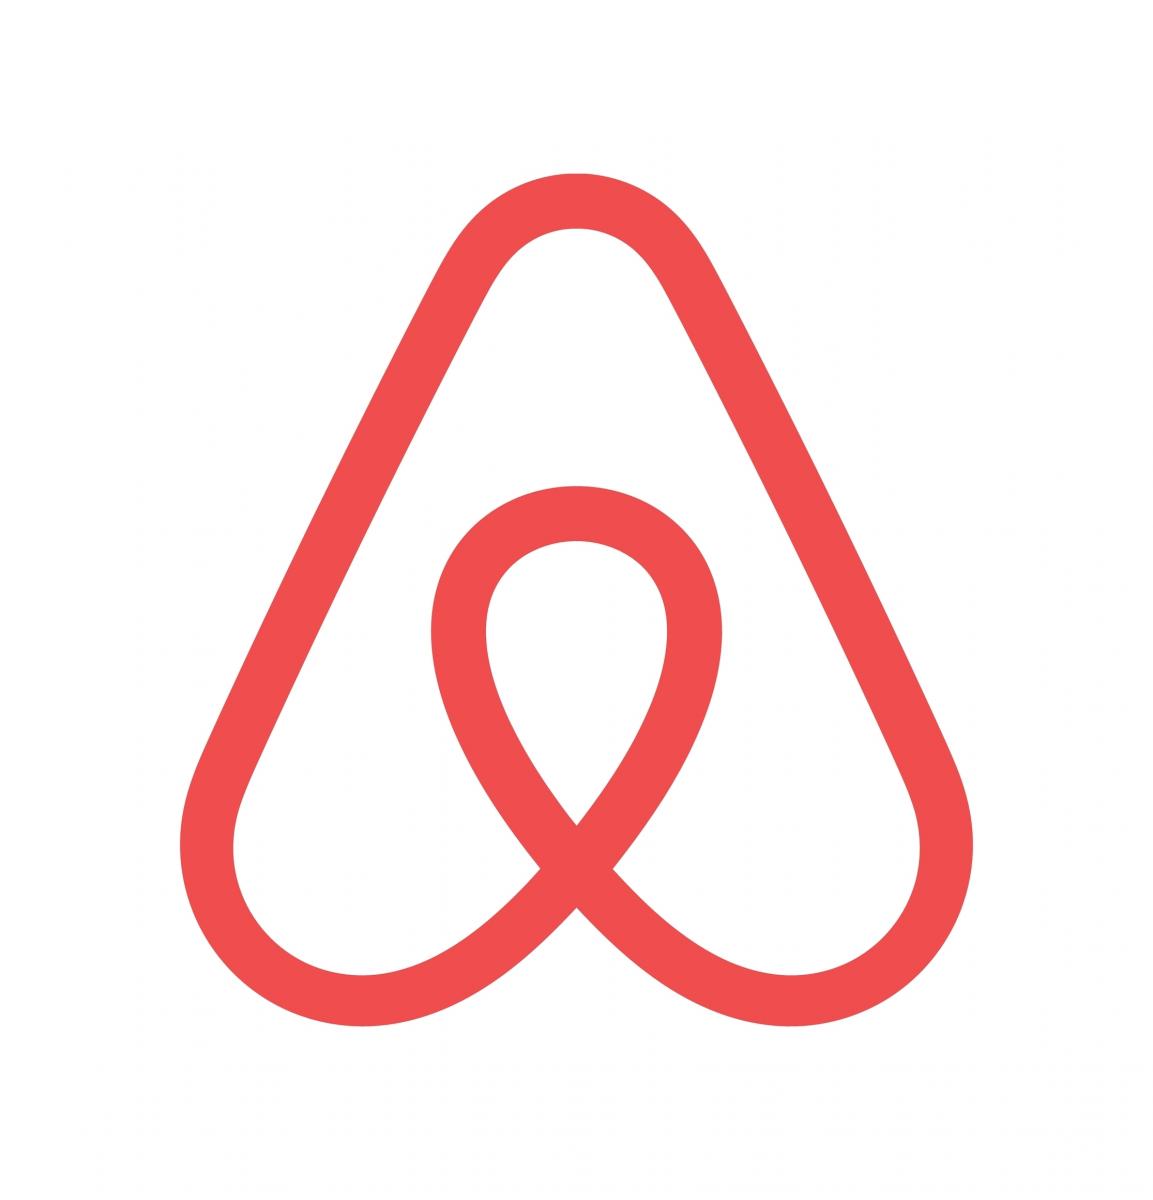 Airbnb claims its short lets support thousands of jobs across UK